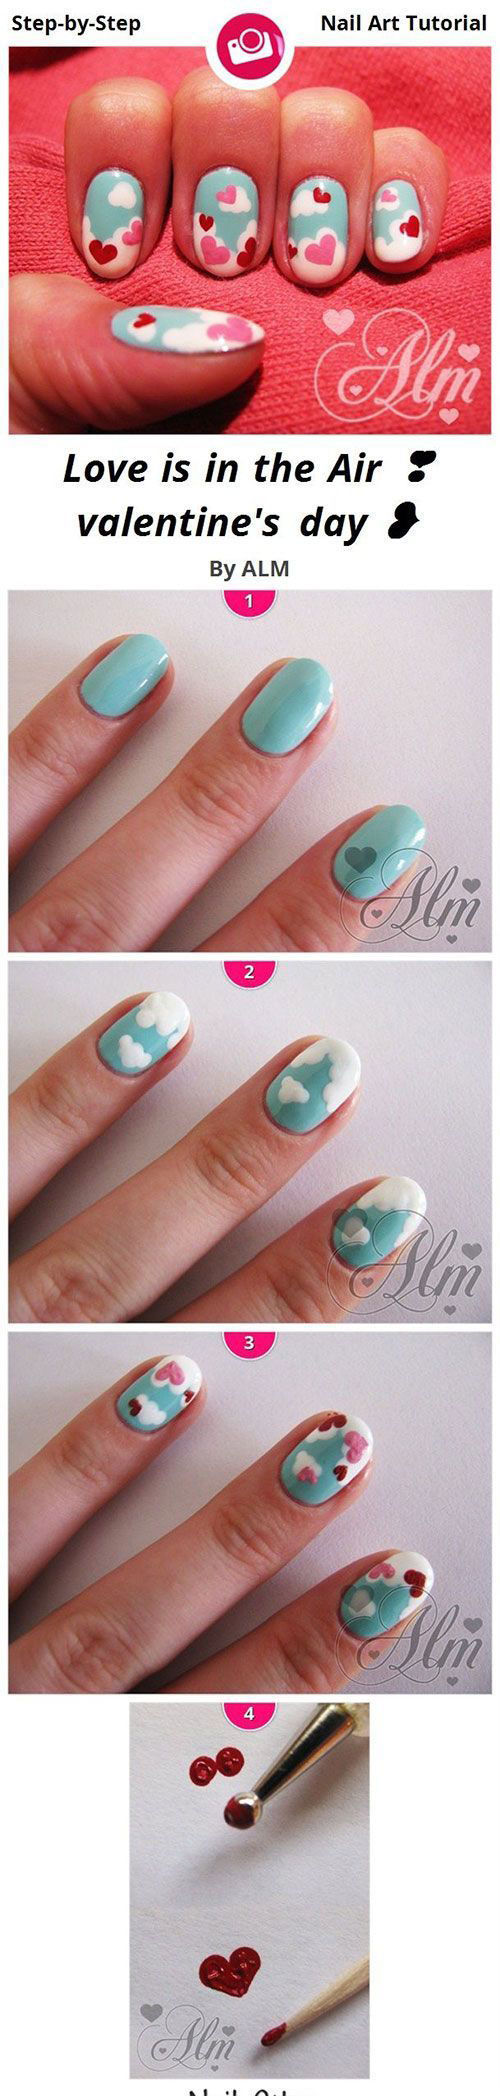 10-Step-By-Step-Valentines-Day-Nail-Art-Tutorials-For-Learners-2017-7